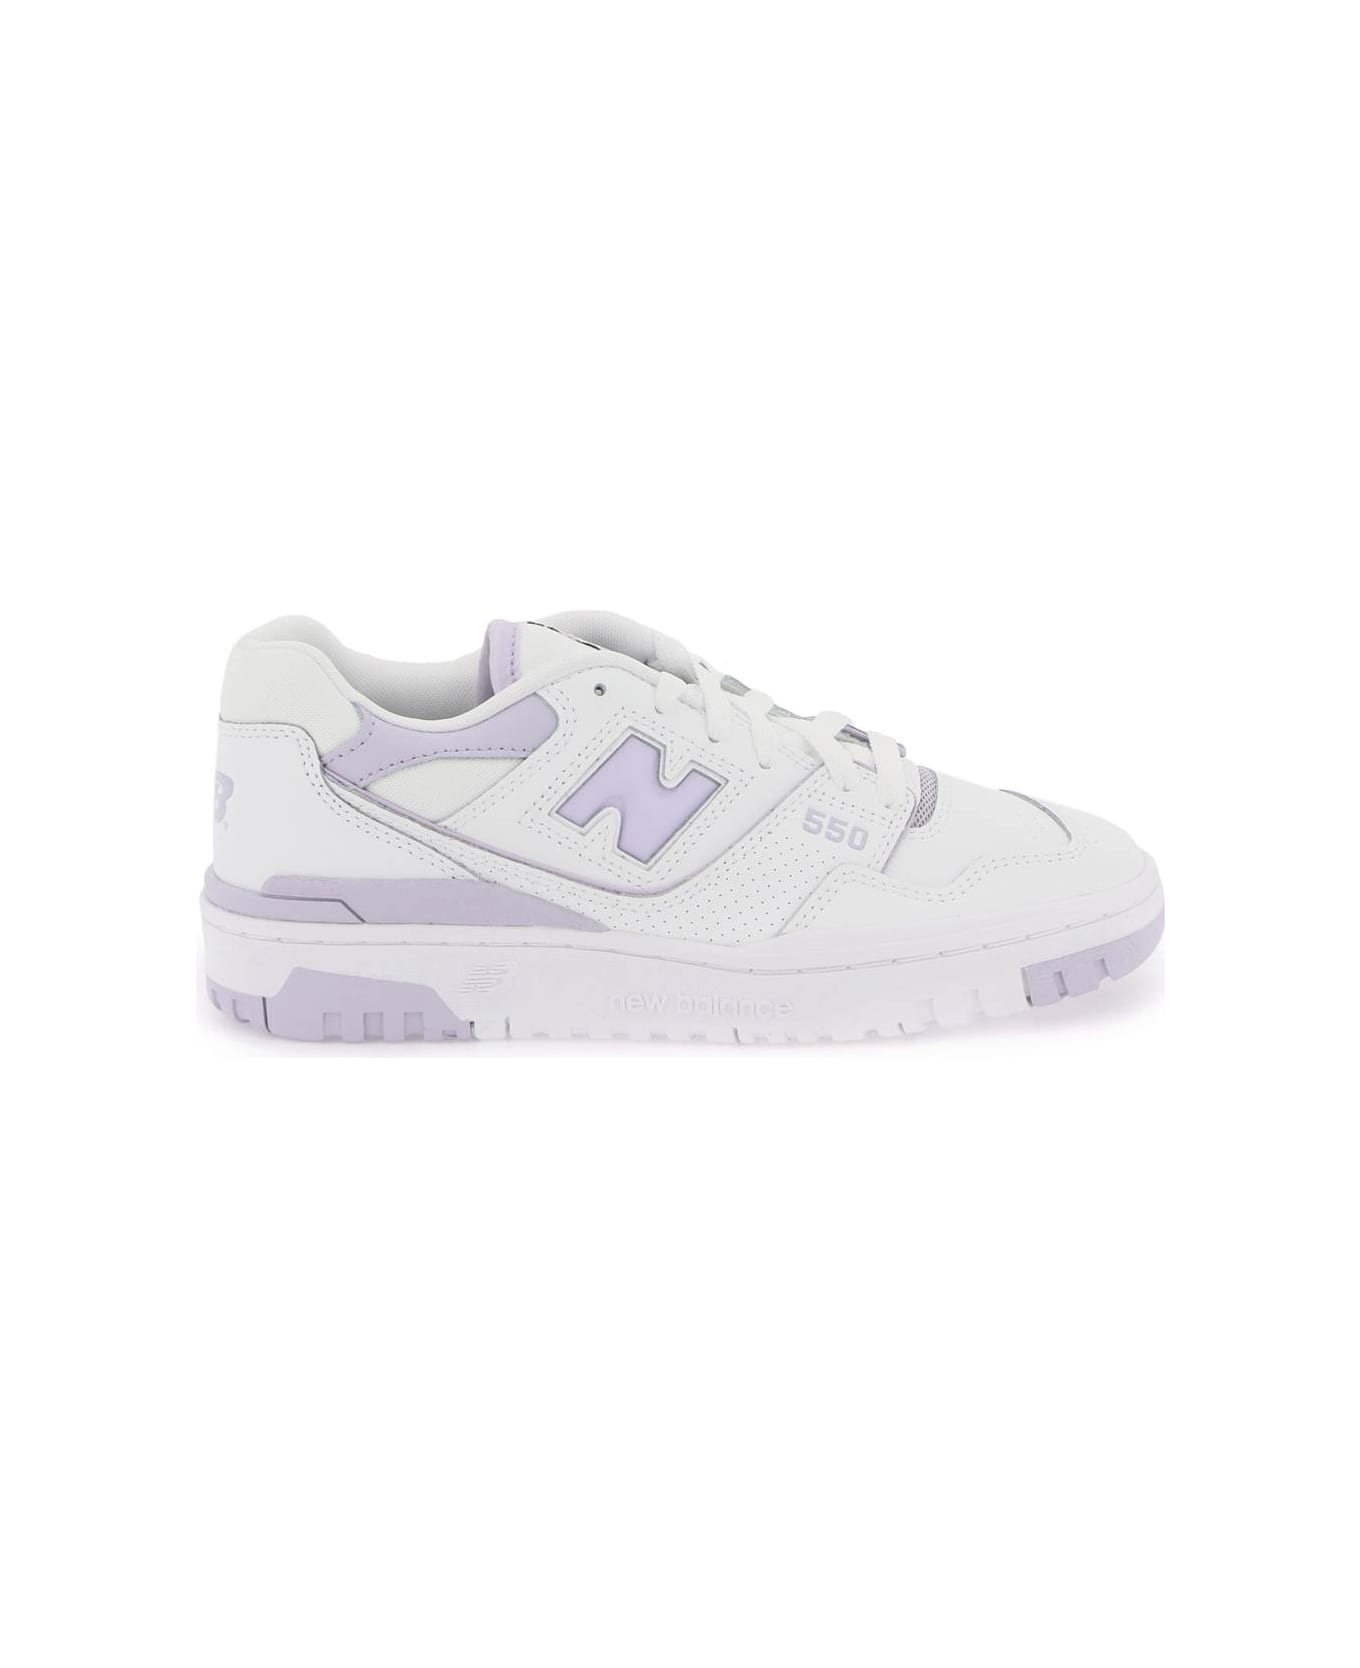 New Balance 550 Sneakers - WHITE